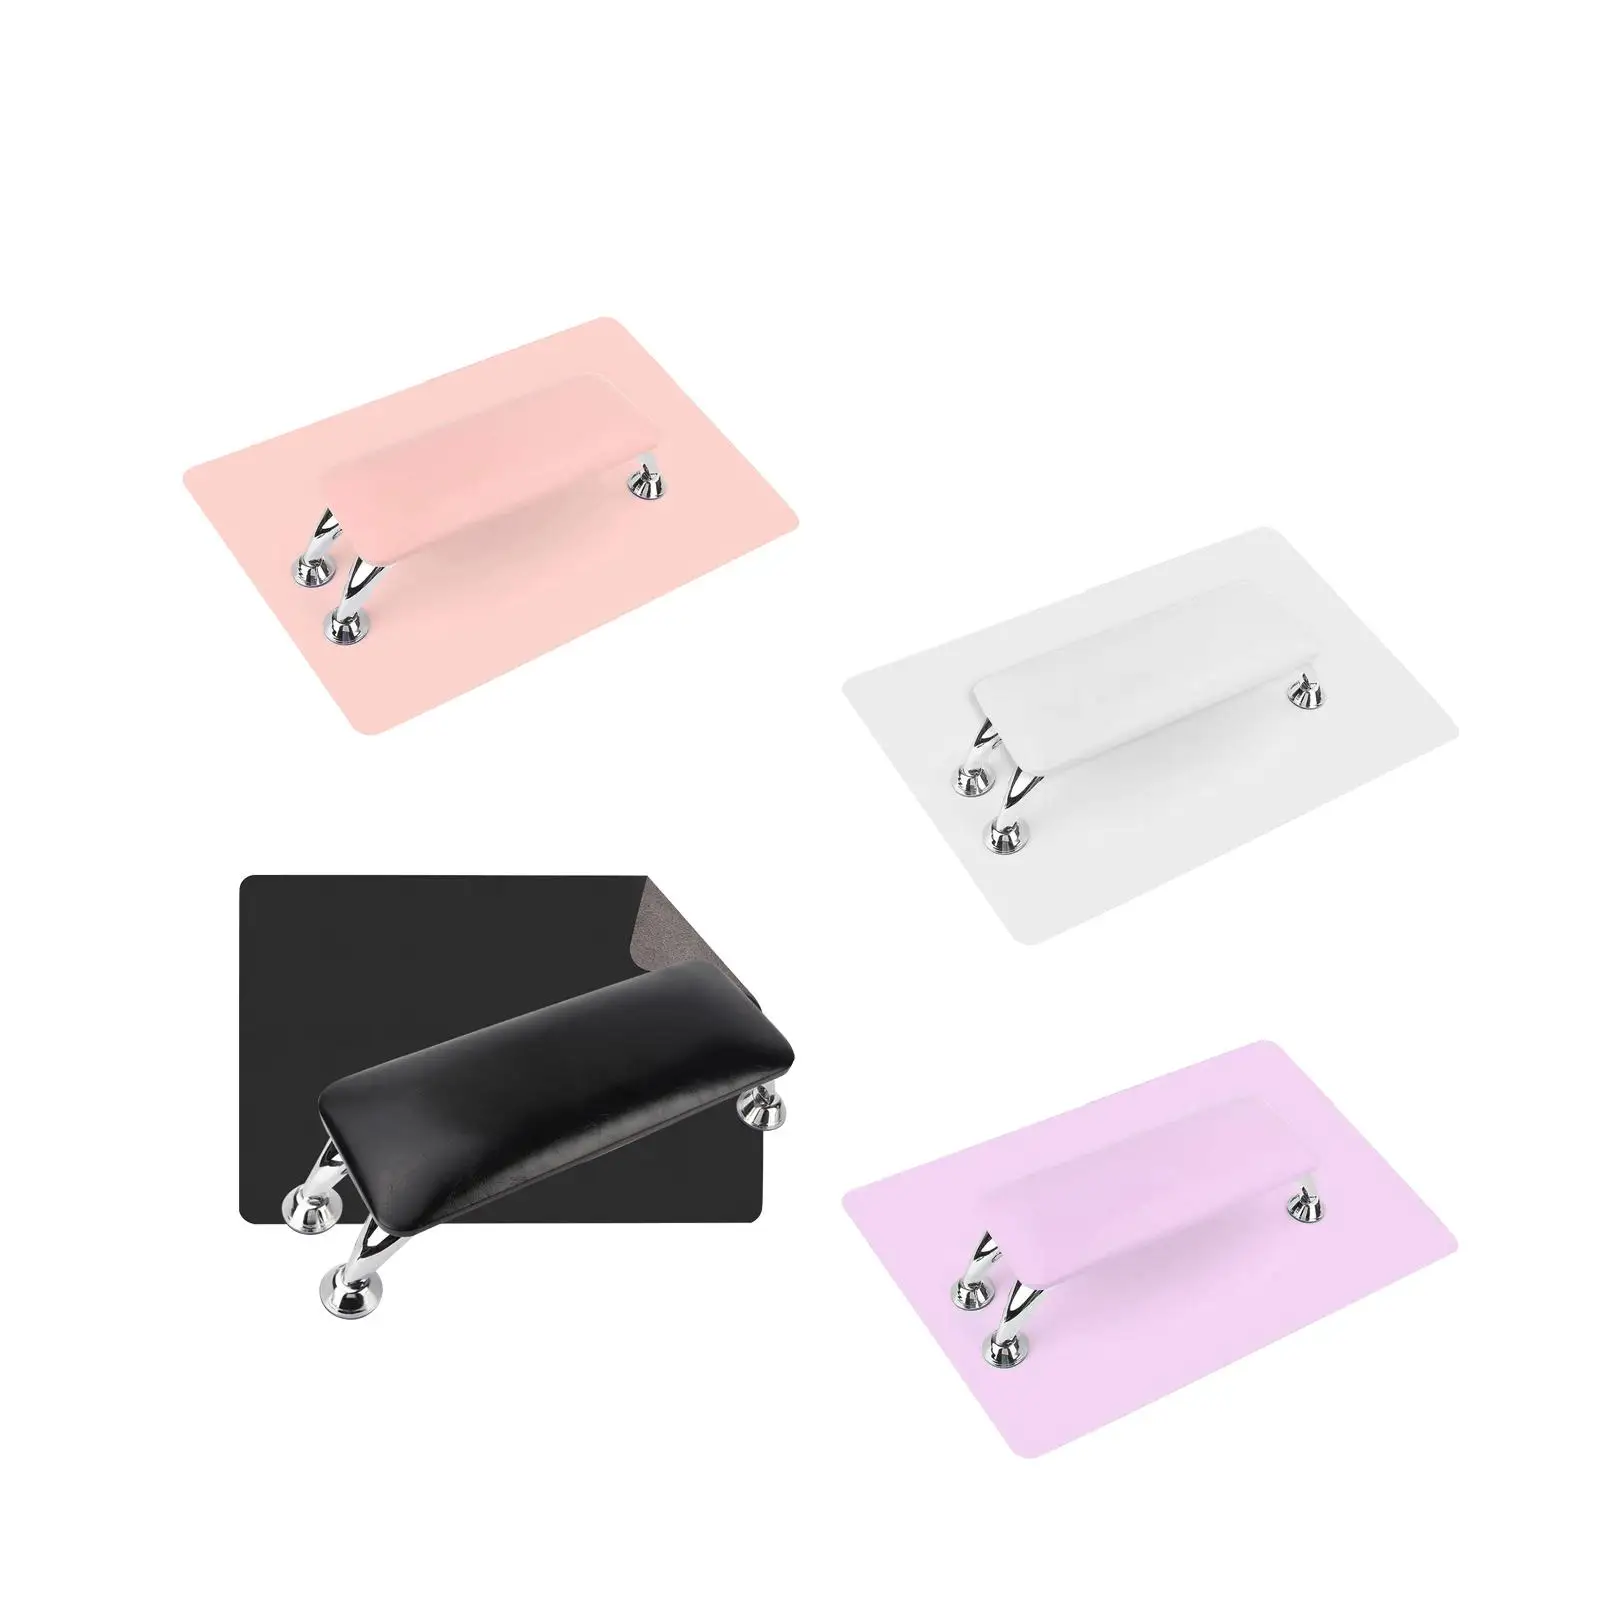 Nail Hand Pillow with Pad Non Slip Professional Nail Rest Cushion Table Desk Station Nail Arm Rest for Salon Nail Art Manicure